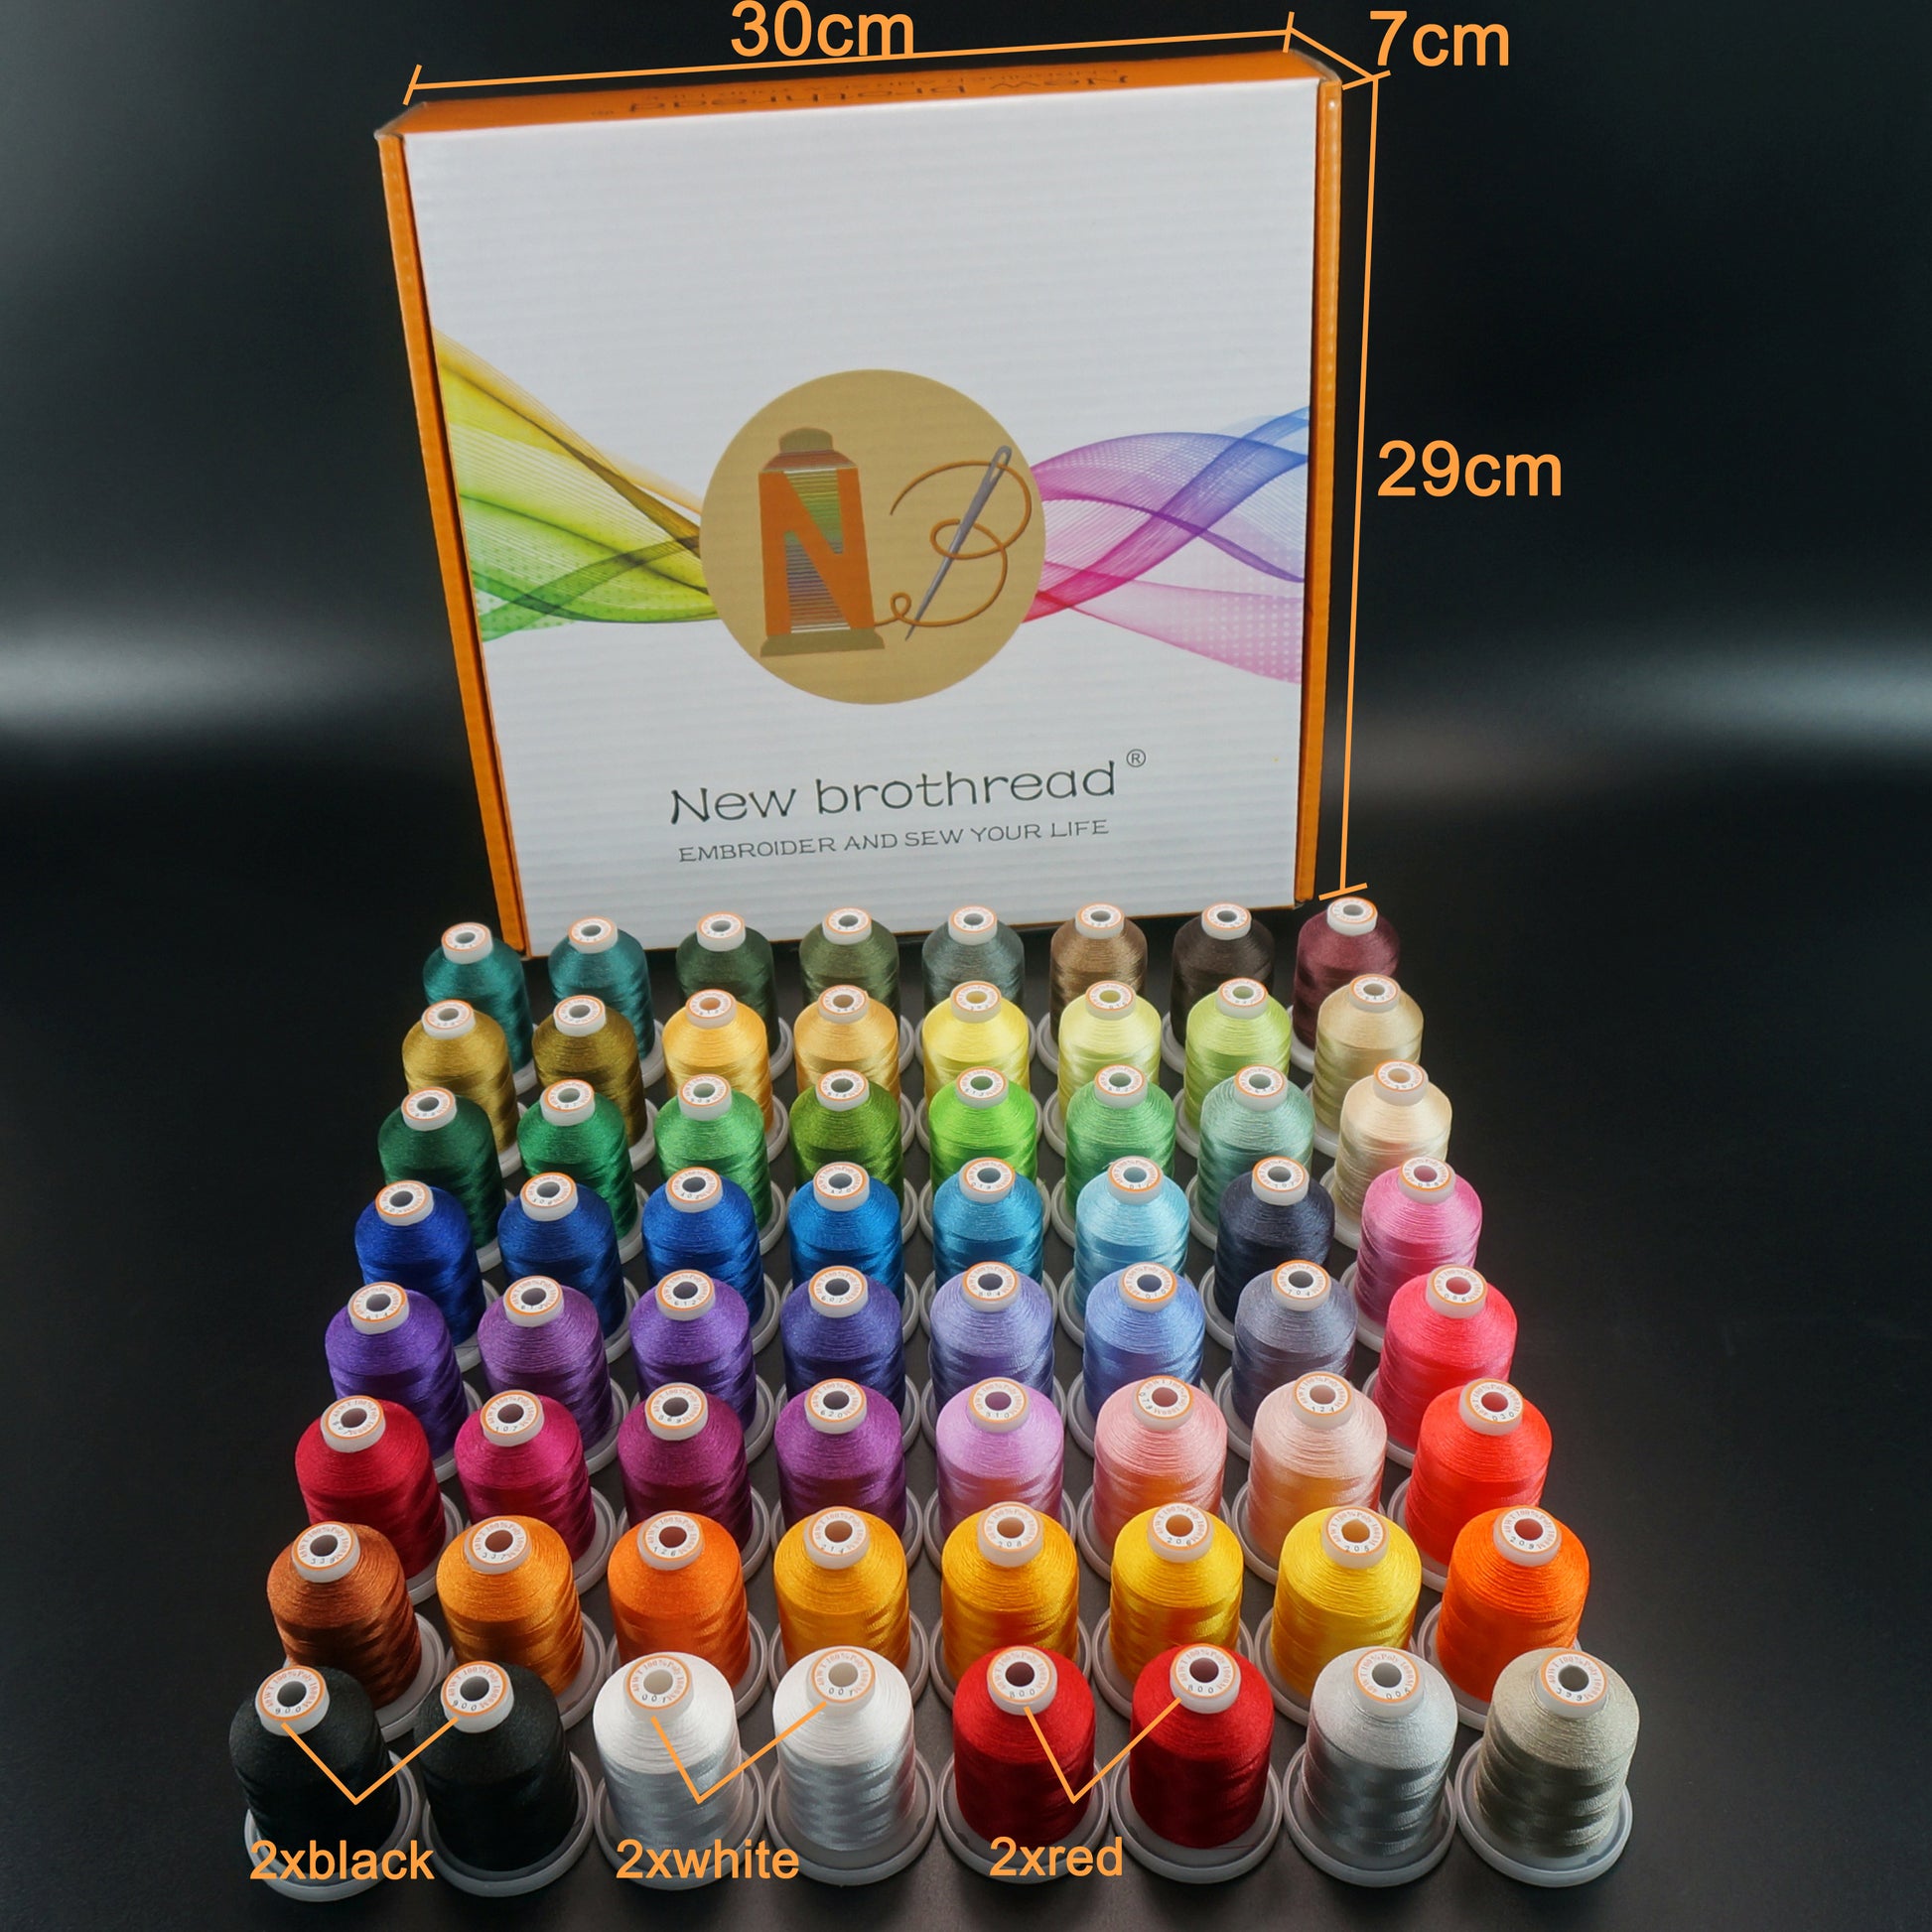 New brothread 60 Brother Colors 500m Each Embroidery Machine Thread wi